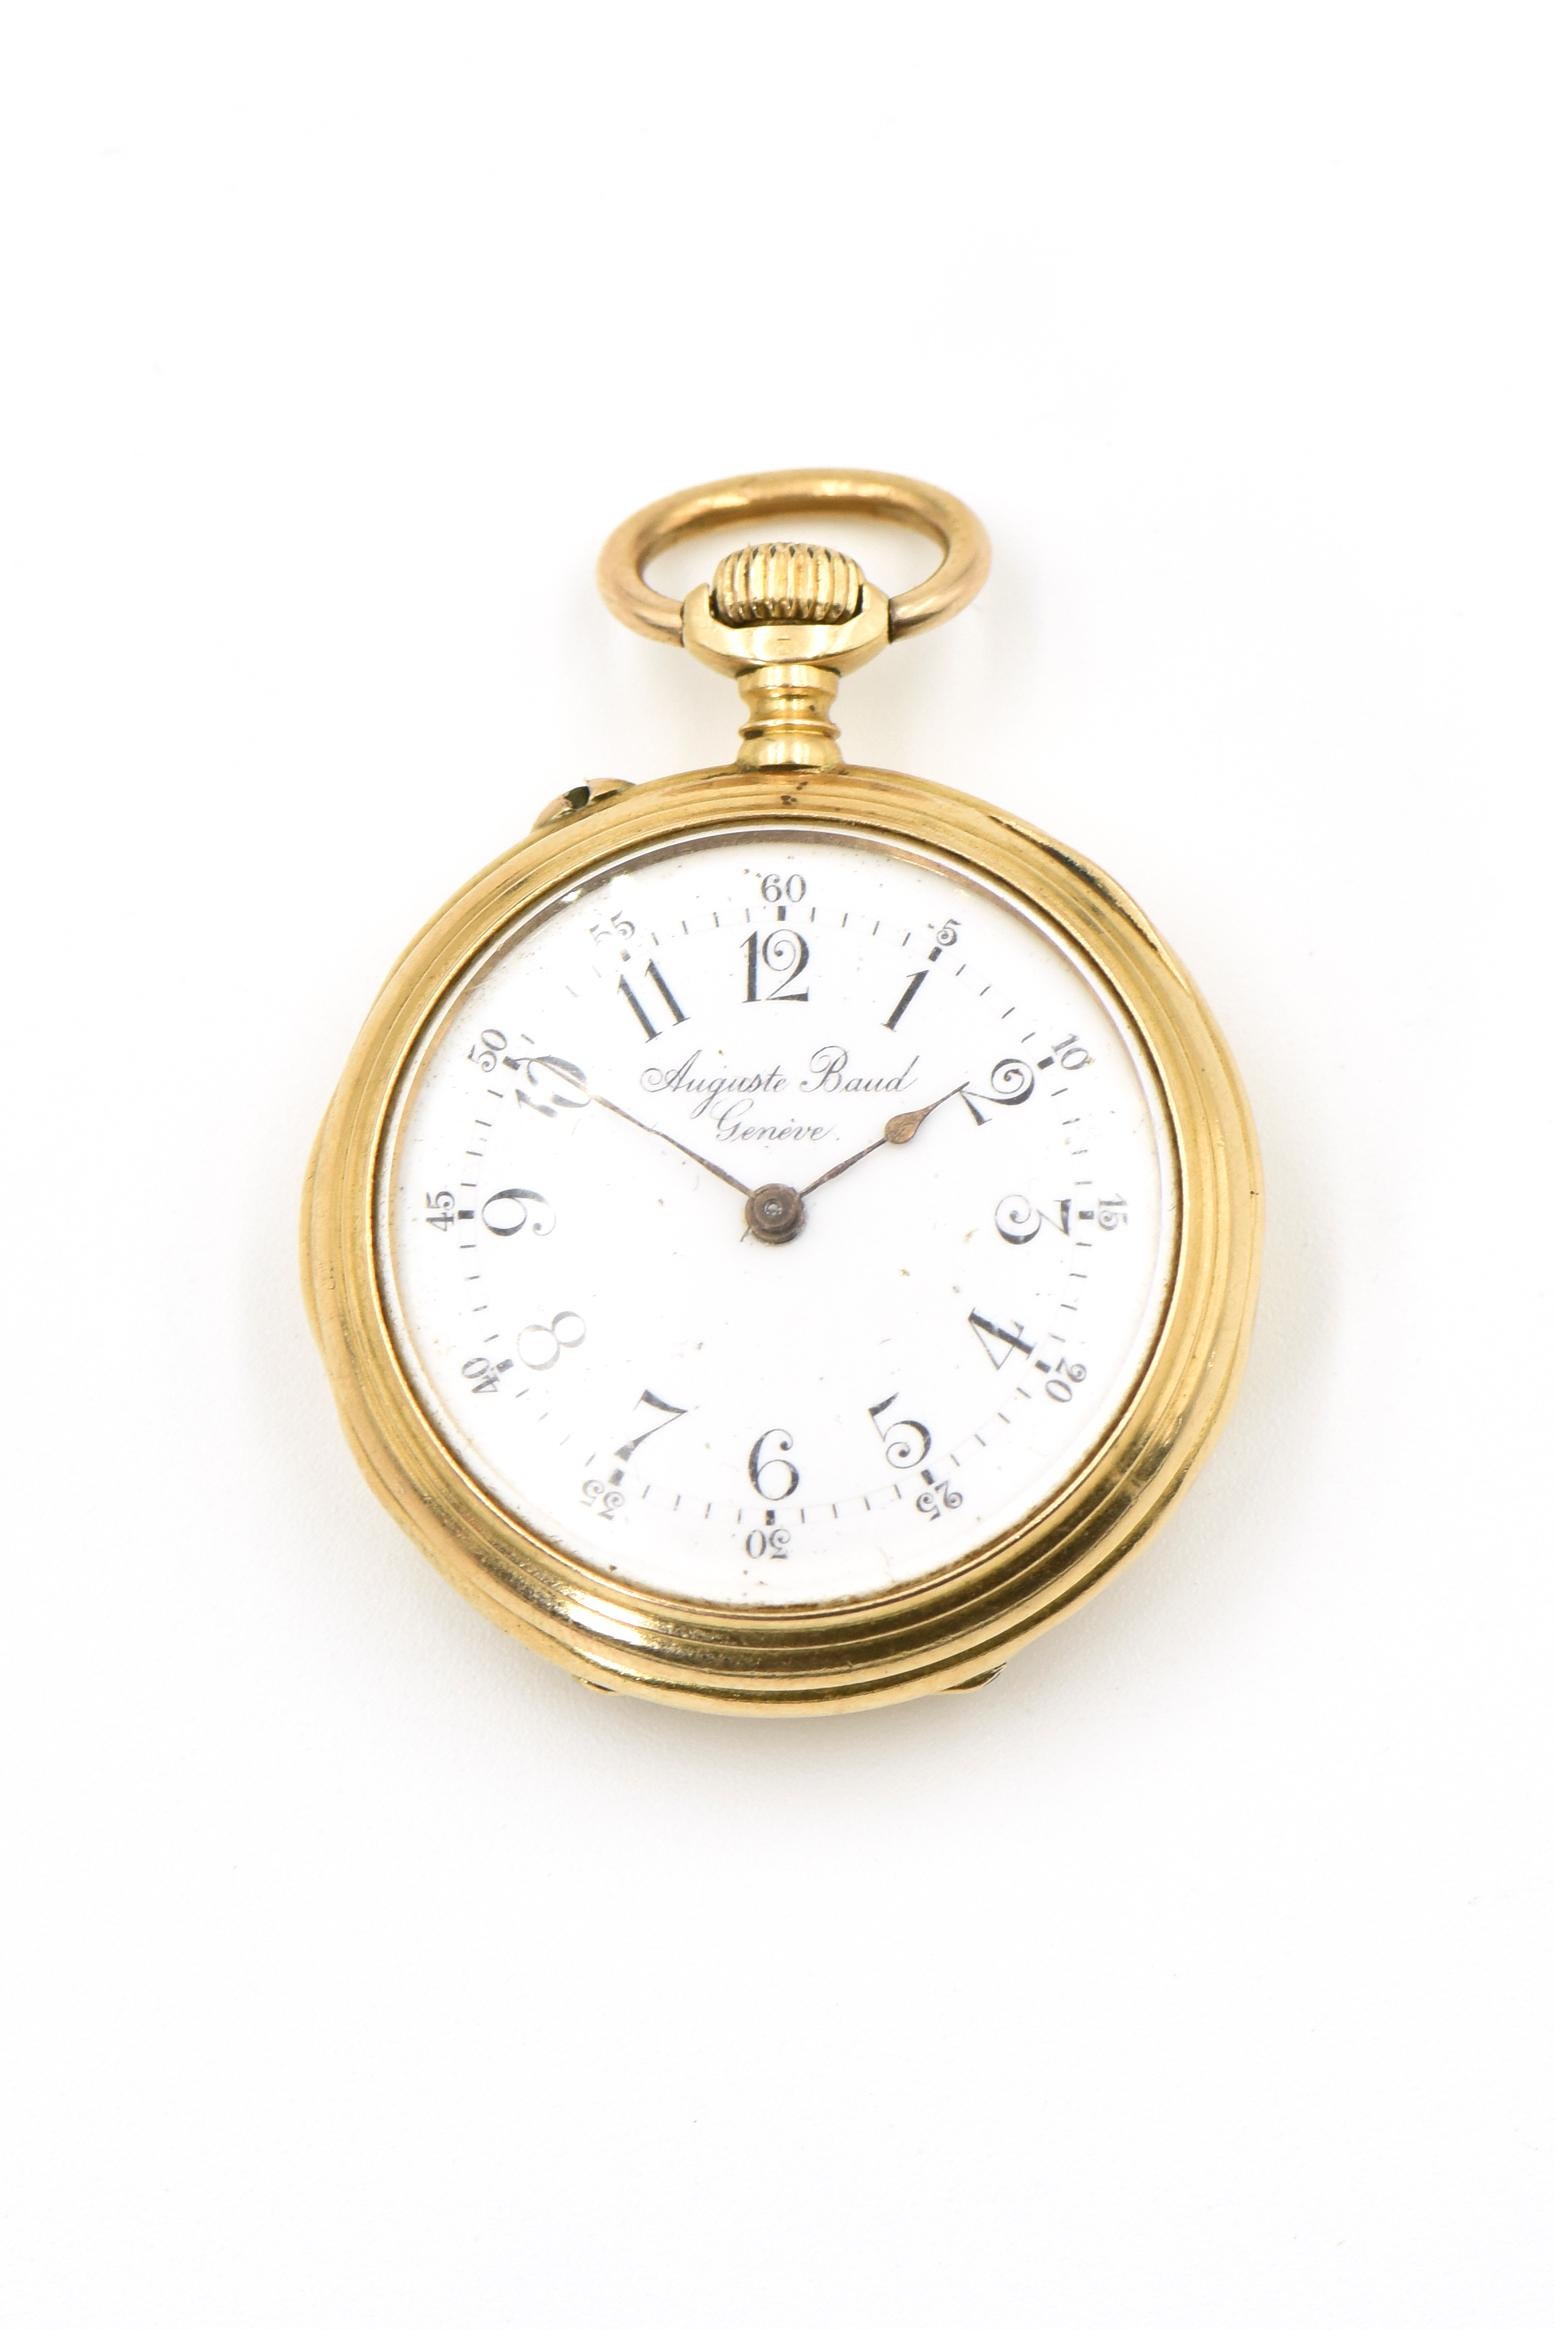 Auguste Baud engraved pocket watch - given to the First Place shooting competition Medal Winner in 1895 in a little town in Winterthur, Switzerland 18k yellow gold. It is not working - the pin set crown wind is not working.